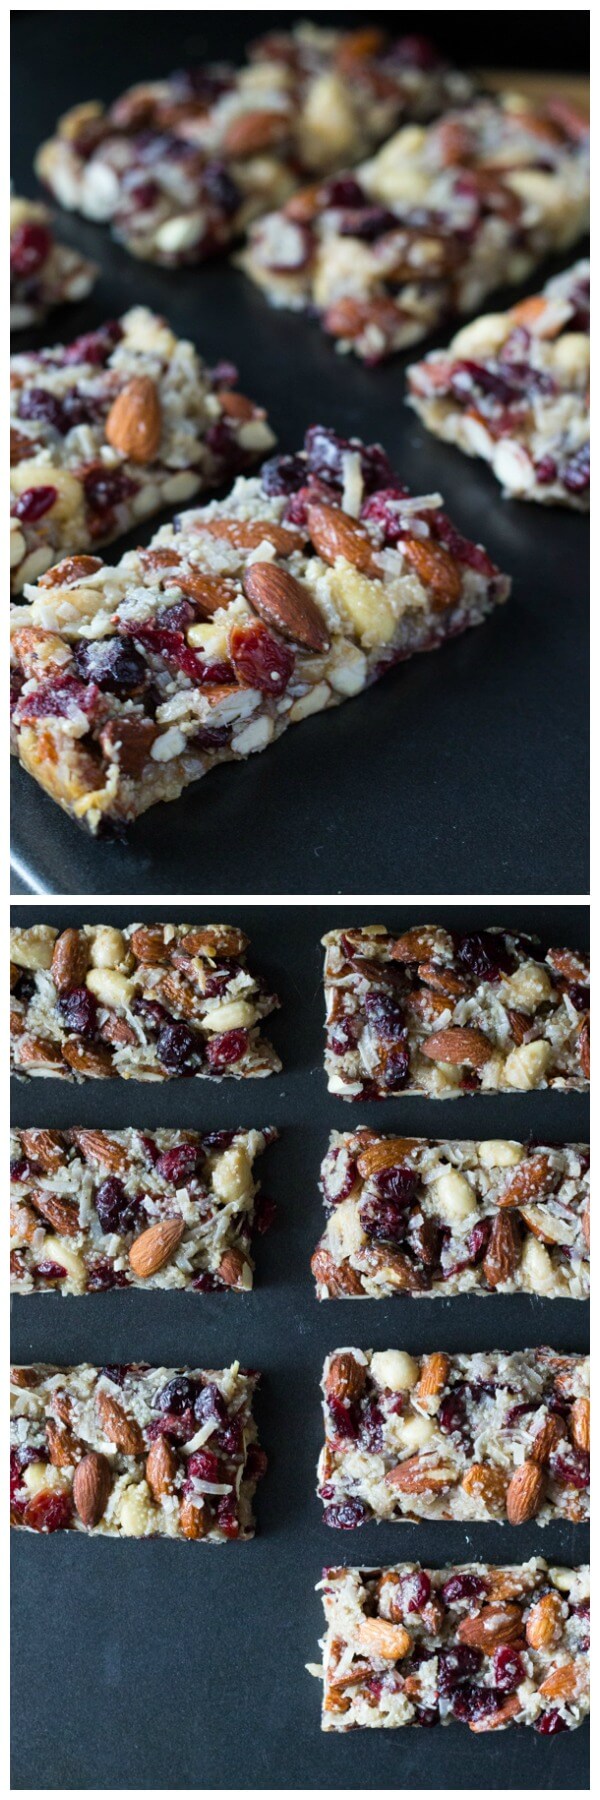 My favorite homemade snack bars. Grain free, no refined sugars & vegan - these Cranberry Almond Snack Bars are super chewy & completely addictive. 